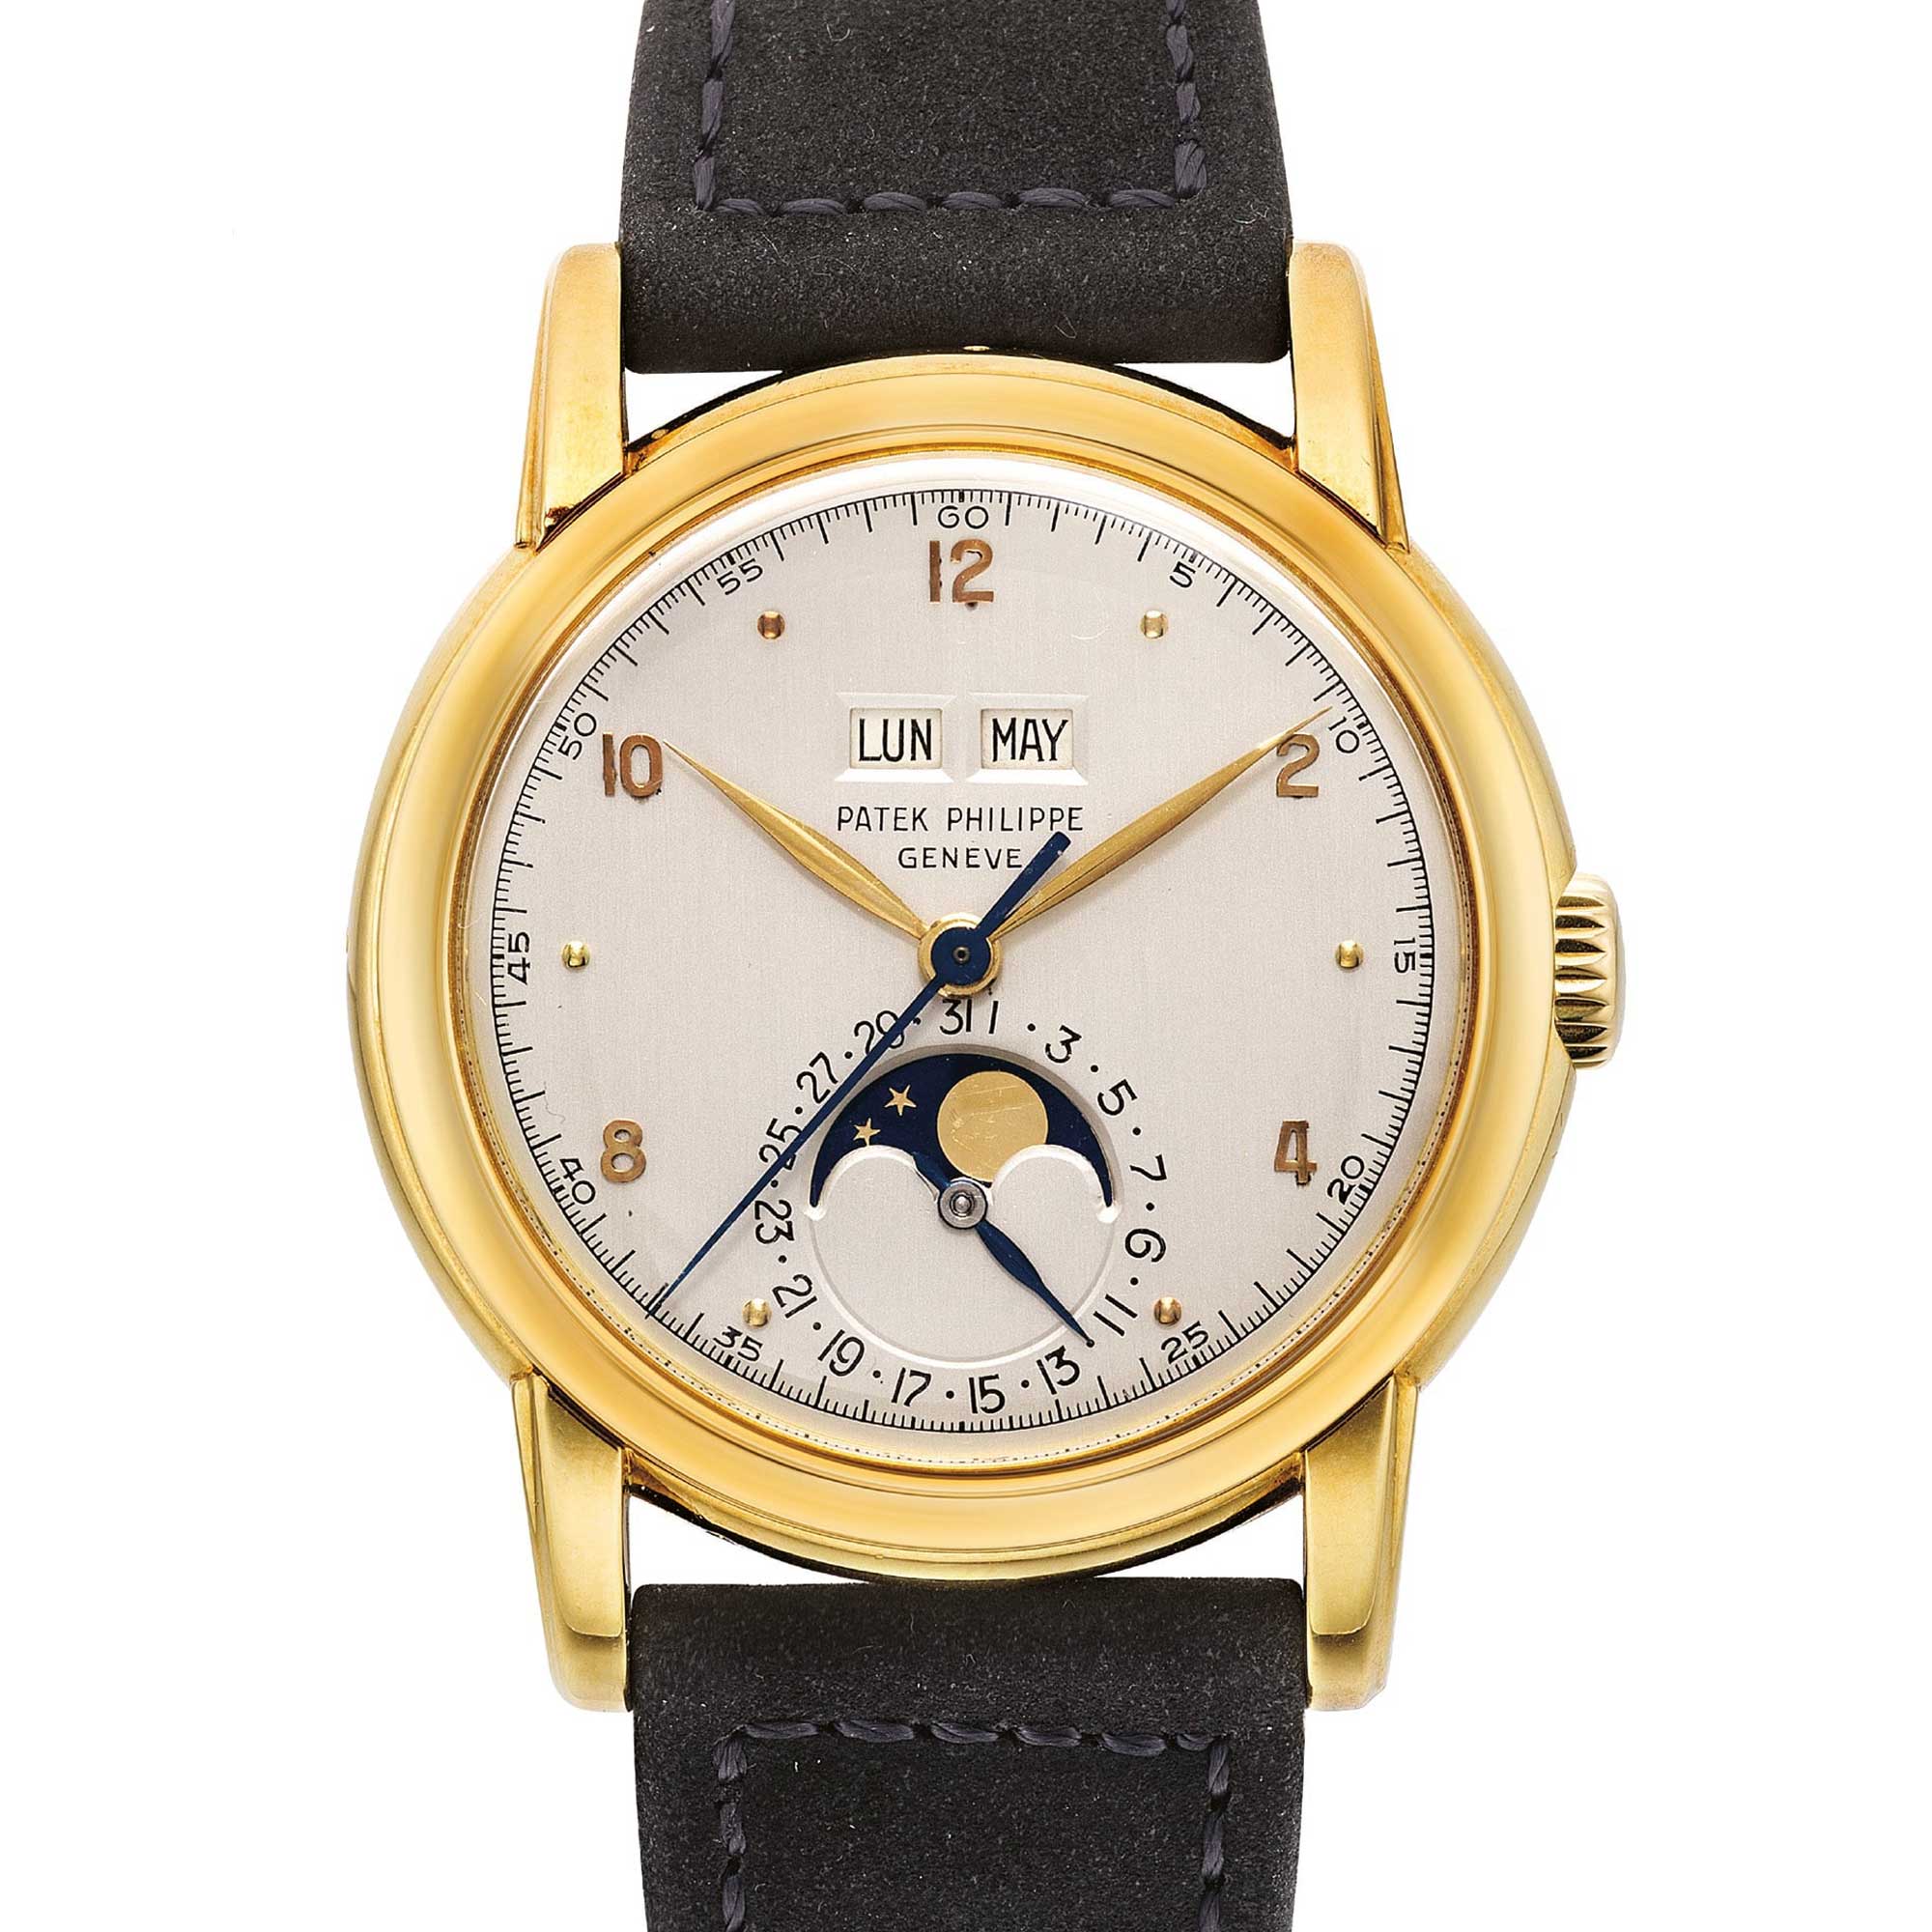 Launched in 1951, Patek Ref. 2497 was the first serially produced sweep seconds perpetual calendar